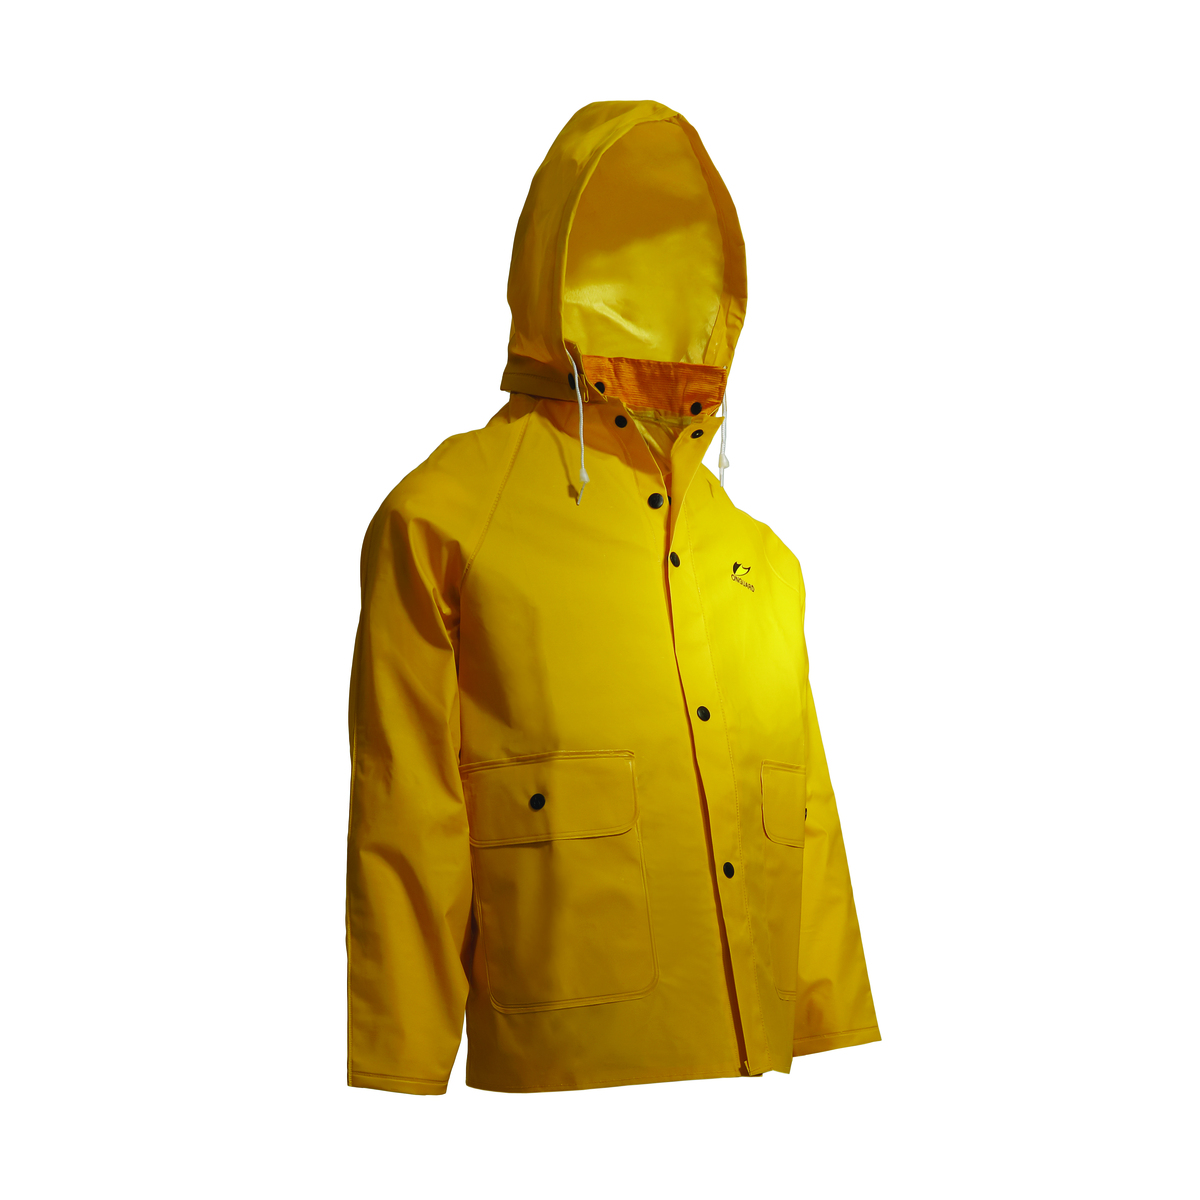 Dunlop® Protective Footwear 3X Yellow Sitex .35 mm Polyester/PVC Rain Jacket With Detachable Hood